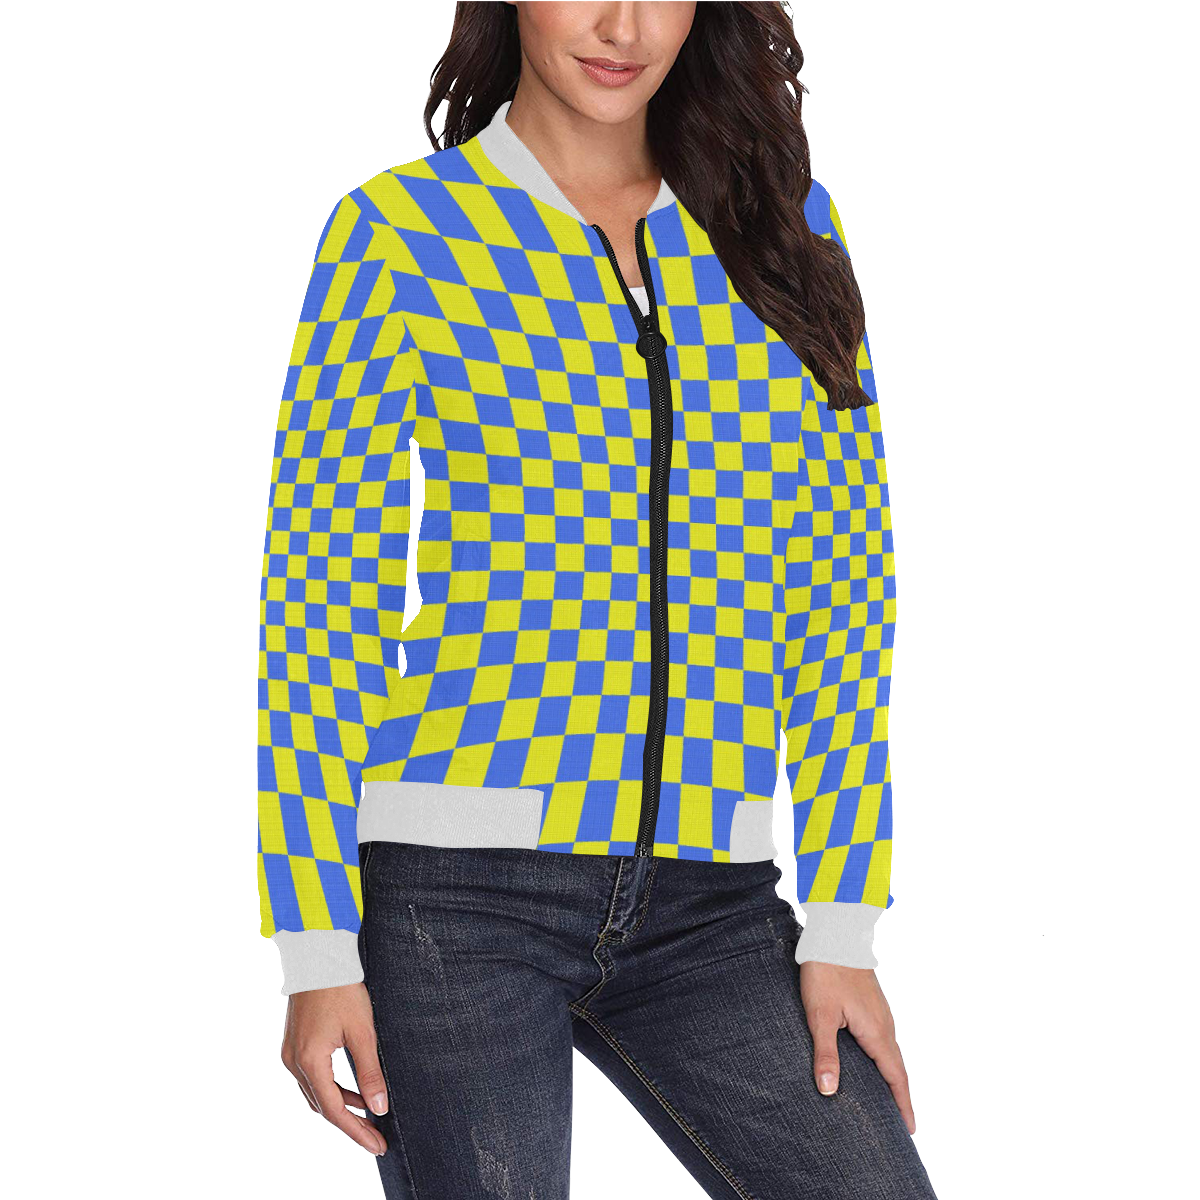 CHECKERBOARD 422 All Over Print Bomber Jacket for Women (Model H36)